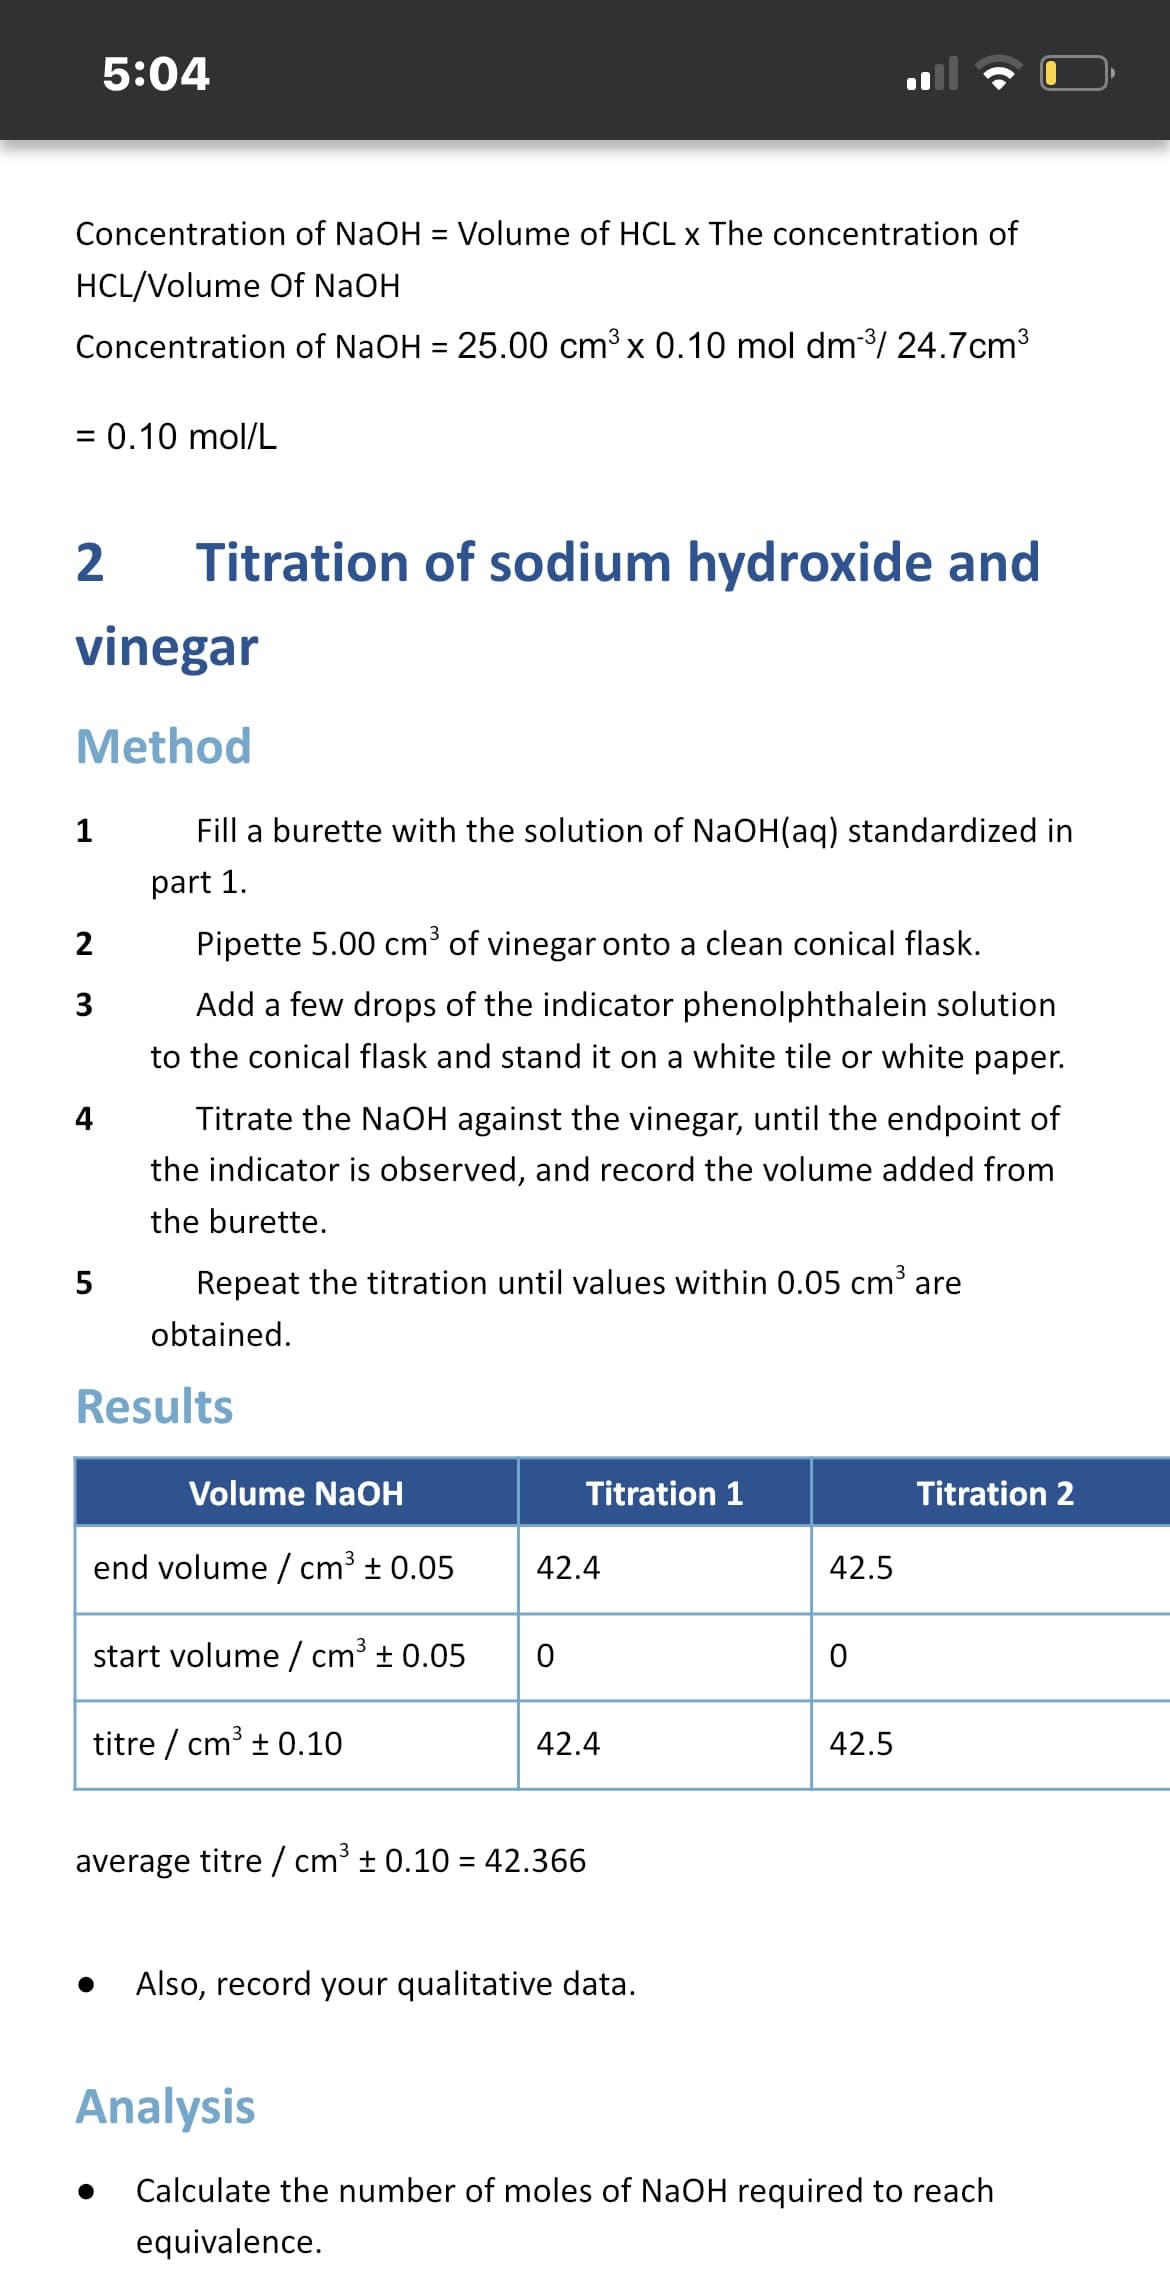 5:04
Concentration of NaOH = Volume of HCL x The concentration of
%3D
HCL/Volume Of NaOH
Concentration of NaOH = 25.00 cm³ x 0.10 mol dm/ 24.7cm3³
= 0.10 mol/L
%3D
2
Titration of sodium hydroxide and
vinegar
Method
1
Fill a burette with the solution of NaOH(aq) standardized in
part 1.
2
Pipette 5.00 cm³ of vinegar onto a clean conical flask.
3
Add a few drops of the indicator phenolphthalein solution
to the conical flask and stand it on a white tile or white paper.
4
Titrate the NaOH against the vinegar, until the endpoint of
the indicator is observed, and record the volume added from
the burette.
Repeat the titration until values within 0.05 cm³ are
obtained.
Results
Volume NaOH
Titration 1
Titration 2
end volume / cm³ ± 0.05
42.4
42.5
start volume / cm³ + 0.05
titre / cm³ + 0.10
42.4
42.5
average titre / cm³ ± 0.10 = 42.366
Also, record your qualitative data.
Analysis
Calculate the number of moles of NaOH required to reach
equivalence.
